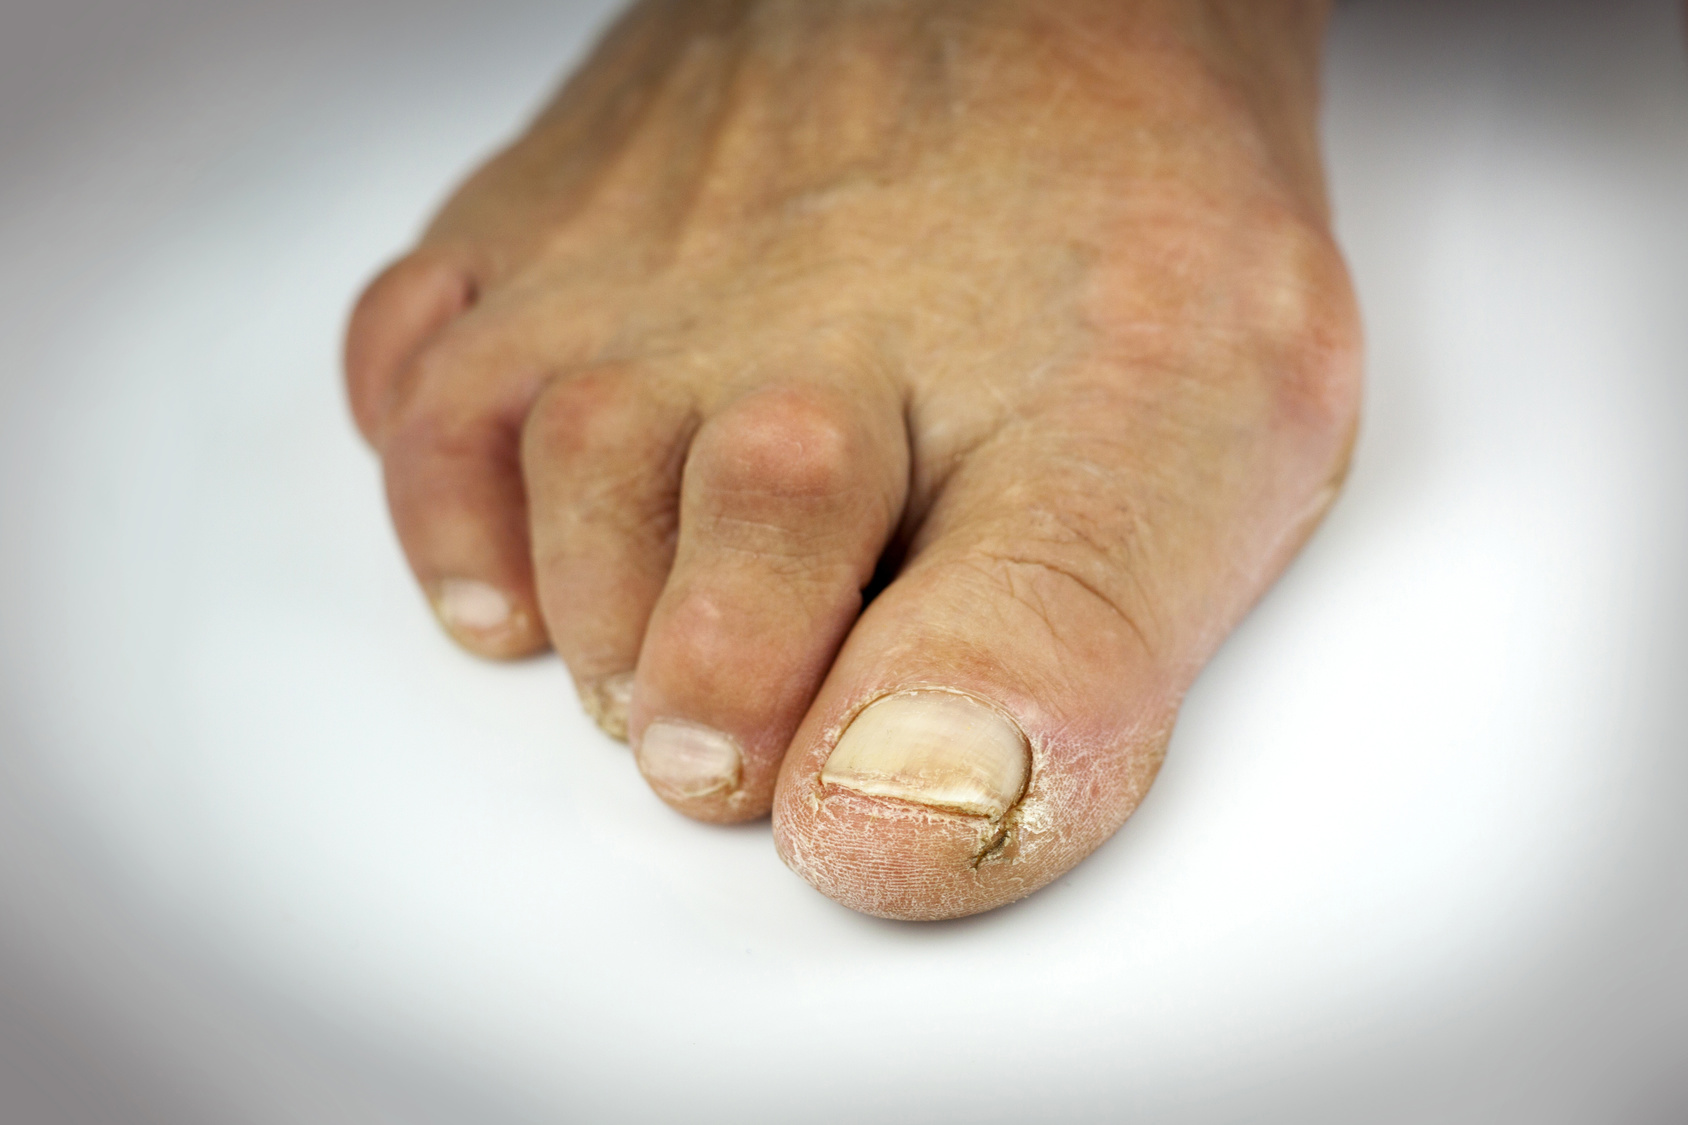 Hammer toe surgery: Types, what to expect, and recovery